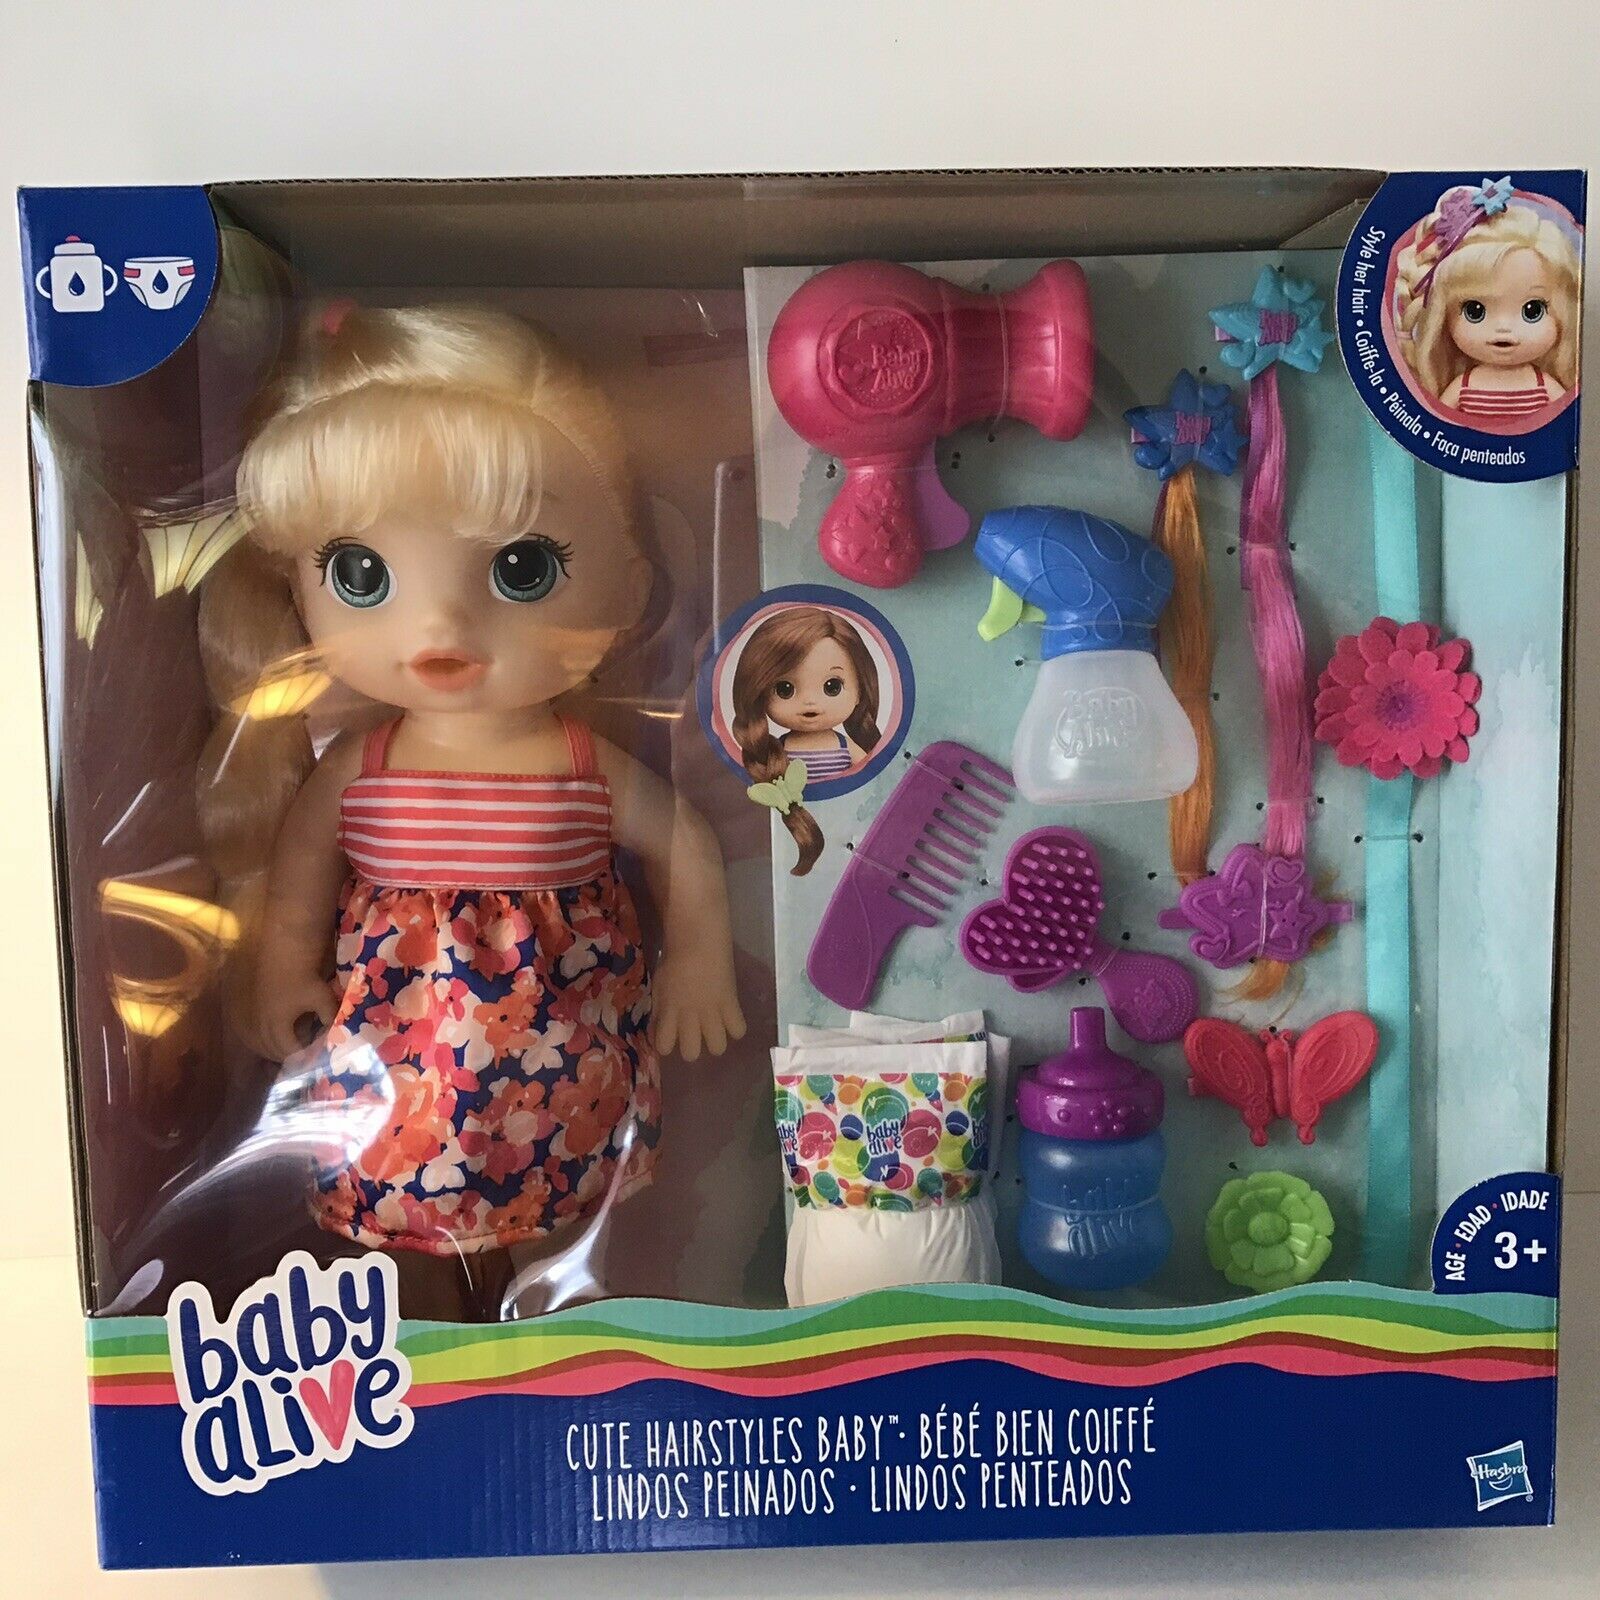 Hasbro Baby Alive Cute Hairstyles Baby Blonde New Kids Toys Baby Alive